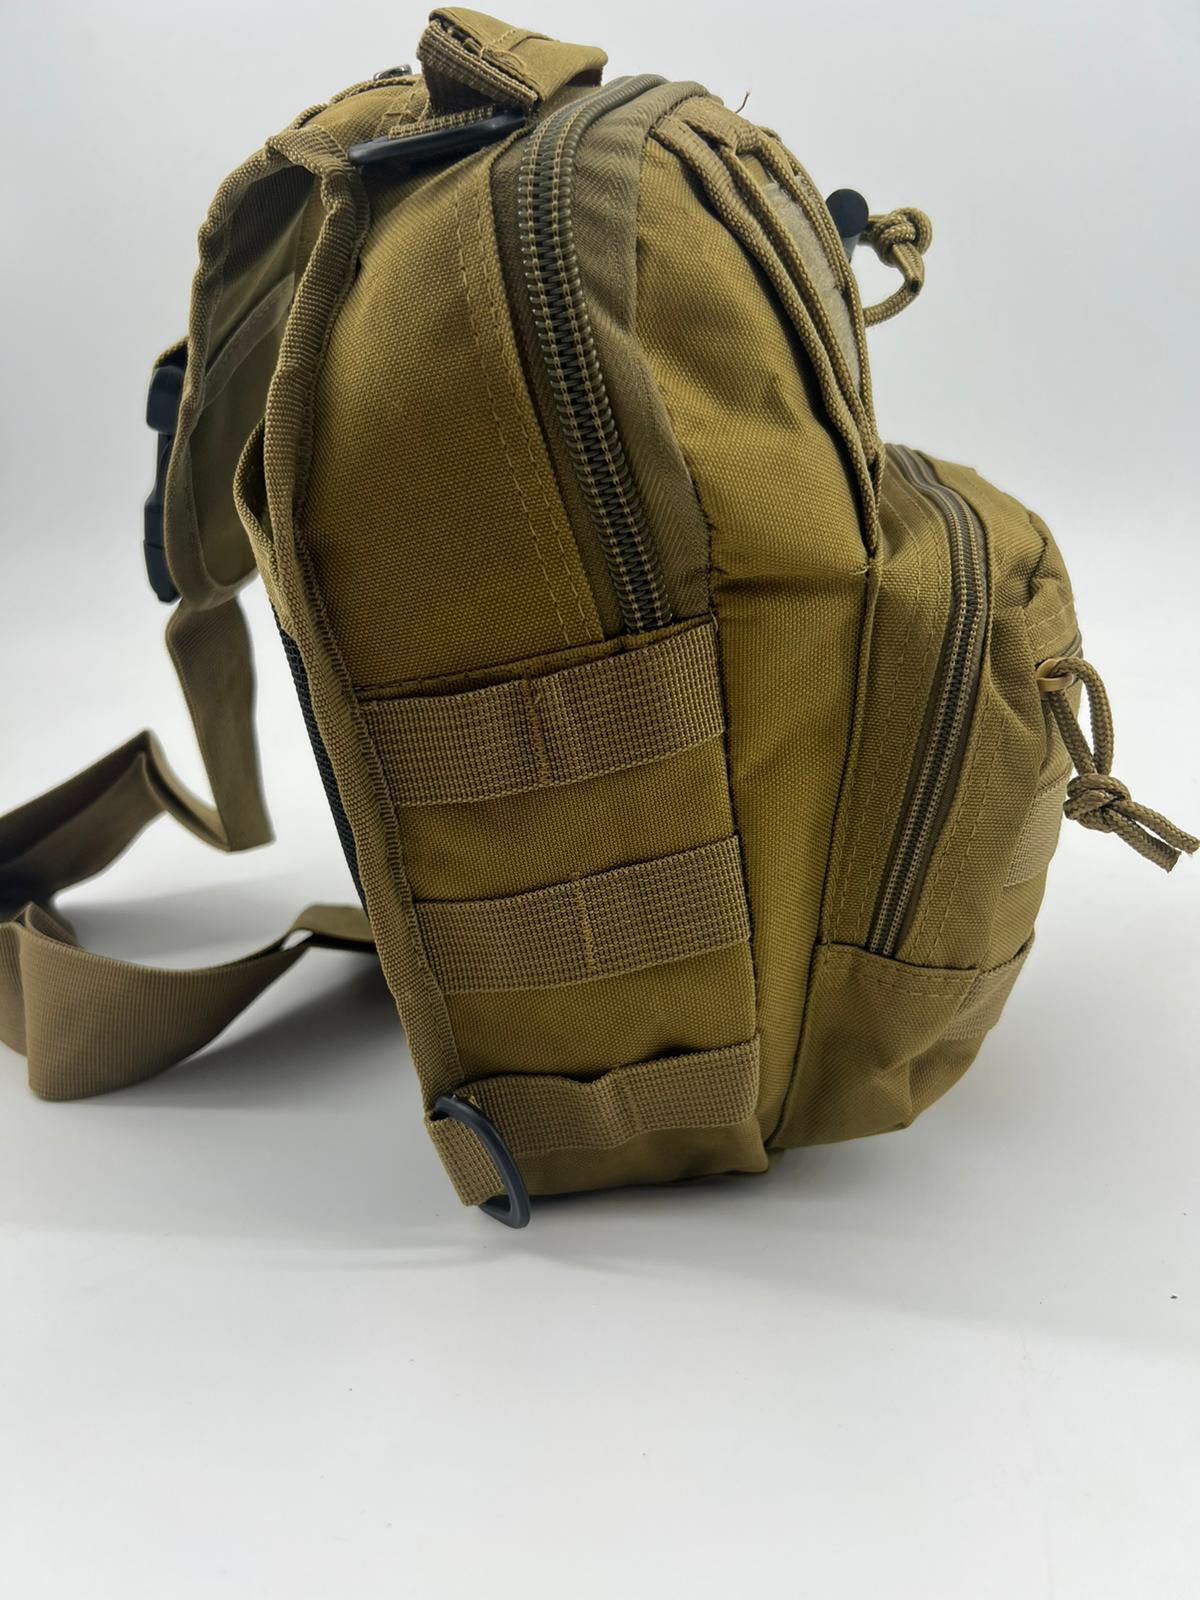 Elite Tactical Chest Bag Backpack Military Sling Shoulder Pack Cross Body Pouch